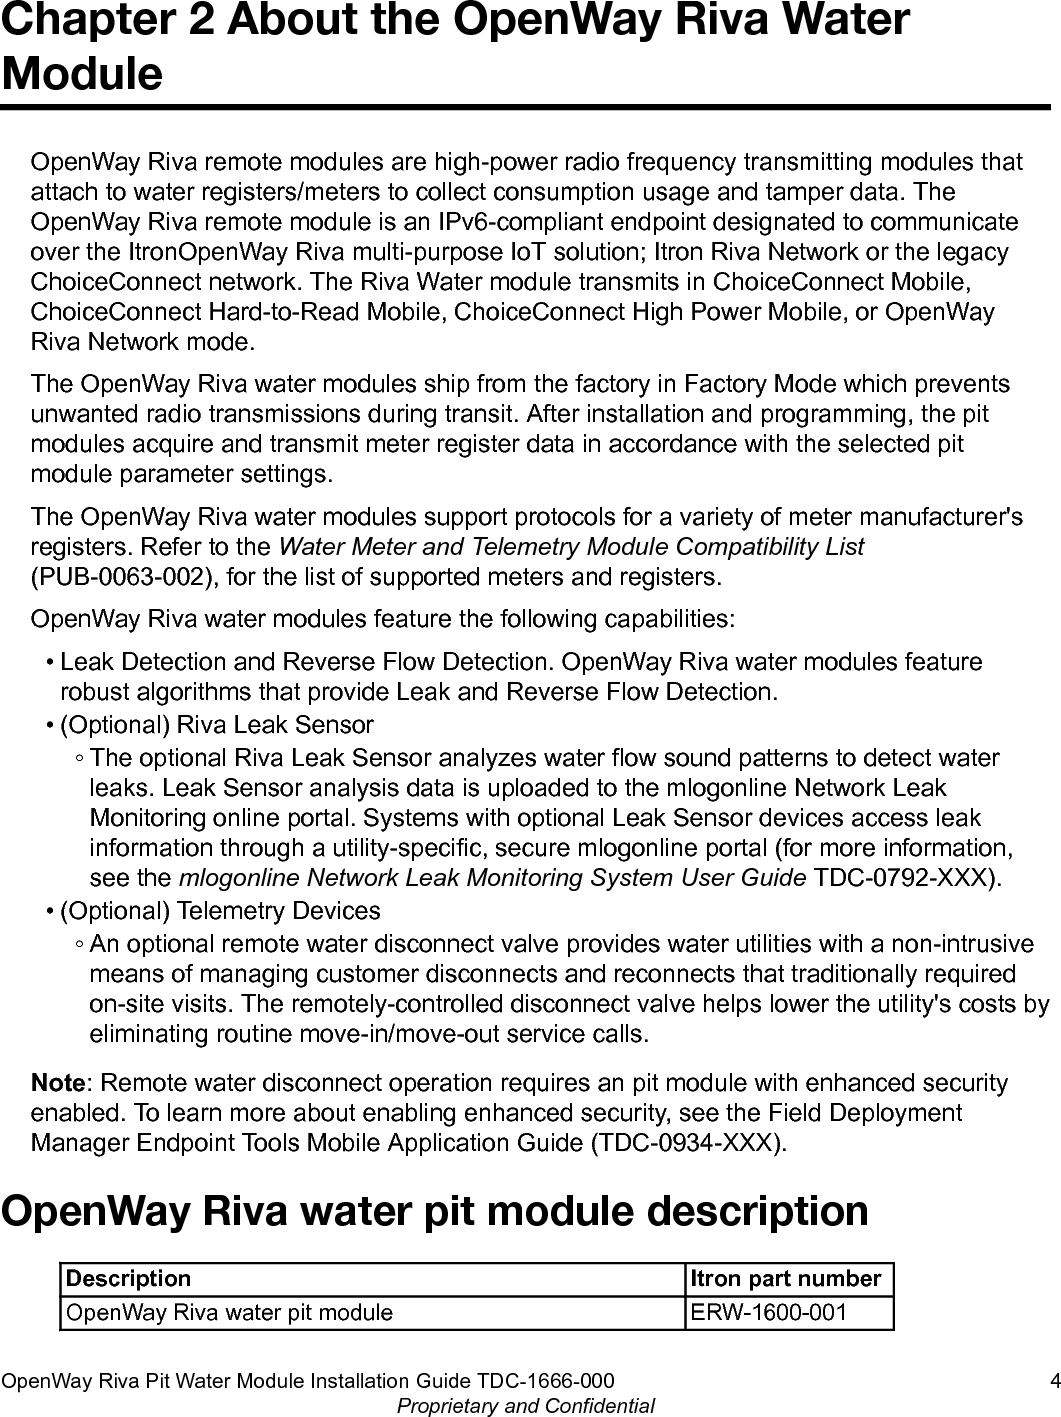 Chapter 2 About the OpenWay Riva WaterModuleOpenWay Riva remote modules are high-power radio frequency transmitting modules thatattach to water registers/meters to collect consumption usage and tamper data. TheOpenWay Riva remote module is an IPv6-compliant endpoint designated to communicateover the ItronOpenWay Riva multi-purpose IoT solution; Itron Riva Network or the legacyChoiceConnect network. The Riva Water module transmits in ChoiceConnect Mobile,ChoiceConnect Hard-to-Read Mobile, ChoiceConnect High Power Mobile, or OpenWayRiva Network mode.The OpenWay Riva water modules ship from the factory in Factory Mode which preventsunwanted radio transmissions during transit. After installation and programming, the pitmodules acquire and transmit meter register data in accordance with the selected pitmodule parameter settings.The OpenWay Riva water modules support protocols for a variety of meter manufacturer&apos;sregisters. Refer to the Water Meter and Telemetry Module Compatibility List(PUB-0063-002), for the list of supported meters and registers.OpenWay Riva water modules feature the following capabilities:• Leak Detection and Reverse Flow Detection. OpenWay Riva water modules featurerobust algorithms that provide Leak and Reverse Flow Detection.• (Optional) Riva Leak Sensor◦ The optional Riva Leak Sensor analyzes water flow sound patterns to detect waterleaks. Leak Sensor analysis data is uploaded to the mlogonline Network LeakMonitoring online portal. Systems with optional Leak Sensor devices access leakinformation through a utility-specific, secure mlogonline portal (for more information,see the mlogonline Network Leak Monitoring System User Guide TDC-0792-XXX).• (Optional) Telemetry Devices◦ An optional remote water disconnect valve provides water utilities with a non-intrusivemeans of managing customer disconnects and reconnects that traditionally requiredon-site visits. The remotely-controlled disconnect valve helps lower the utility&apos;s costs byeliminating routine move-in/move-out service calls.Note: Remote water disconnect operation requires an pit module with enhanced securityenabled. To learn more about enabling enhanced security, see the Field DeploymentManager Endpoint Tools Mobile Application Guide (TDC-0934-XXX).OpenWay Riva water pit module descriptionDescription Itron part numberOpenWay Riva water pit module ERW-1600-001OpenWay Riva Pit Water Module Installation Guide TDC-1666-000 4Proprietary and Confidential